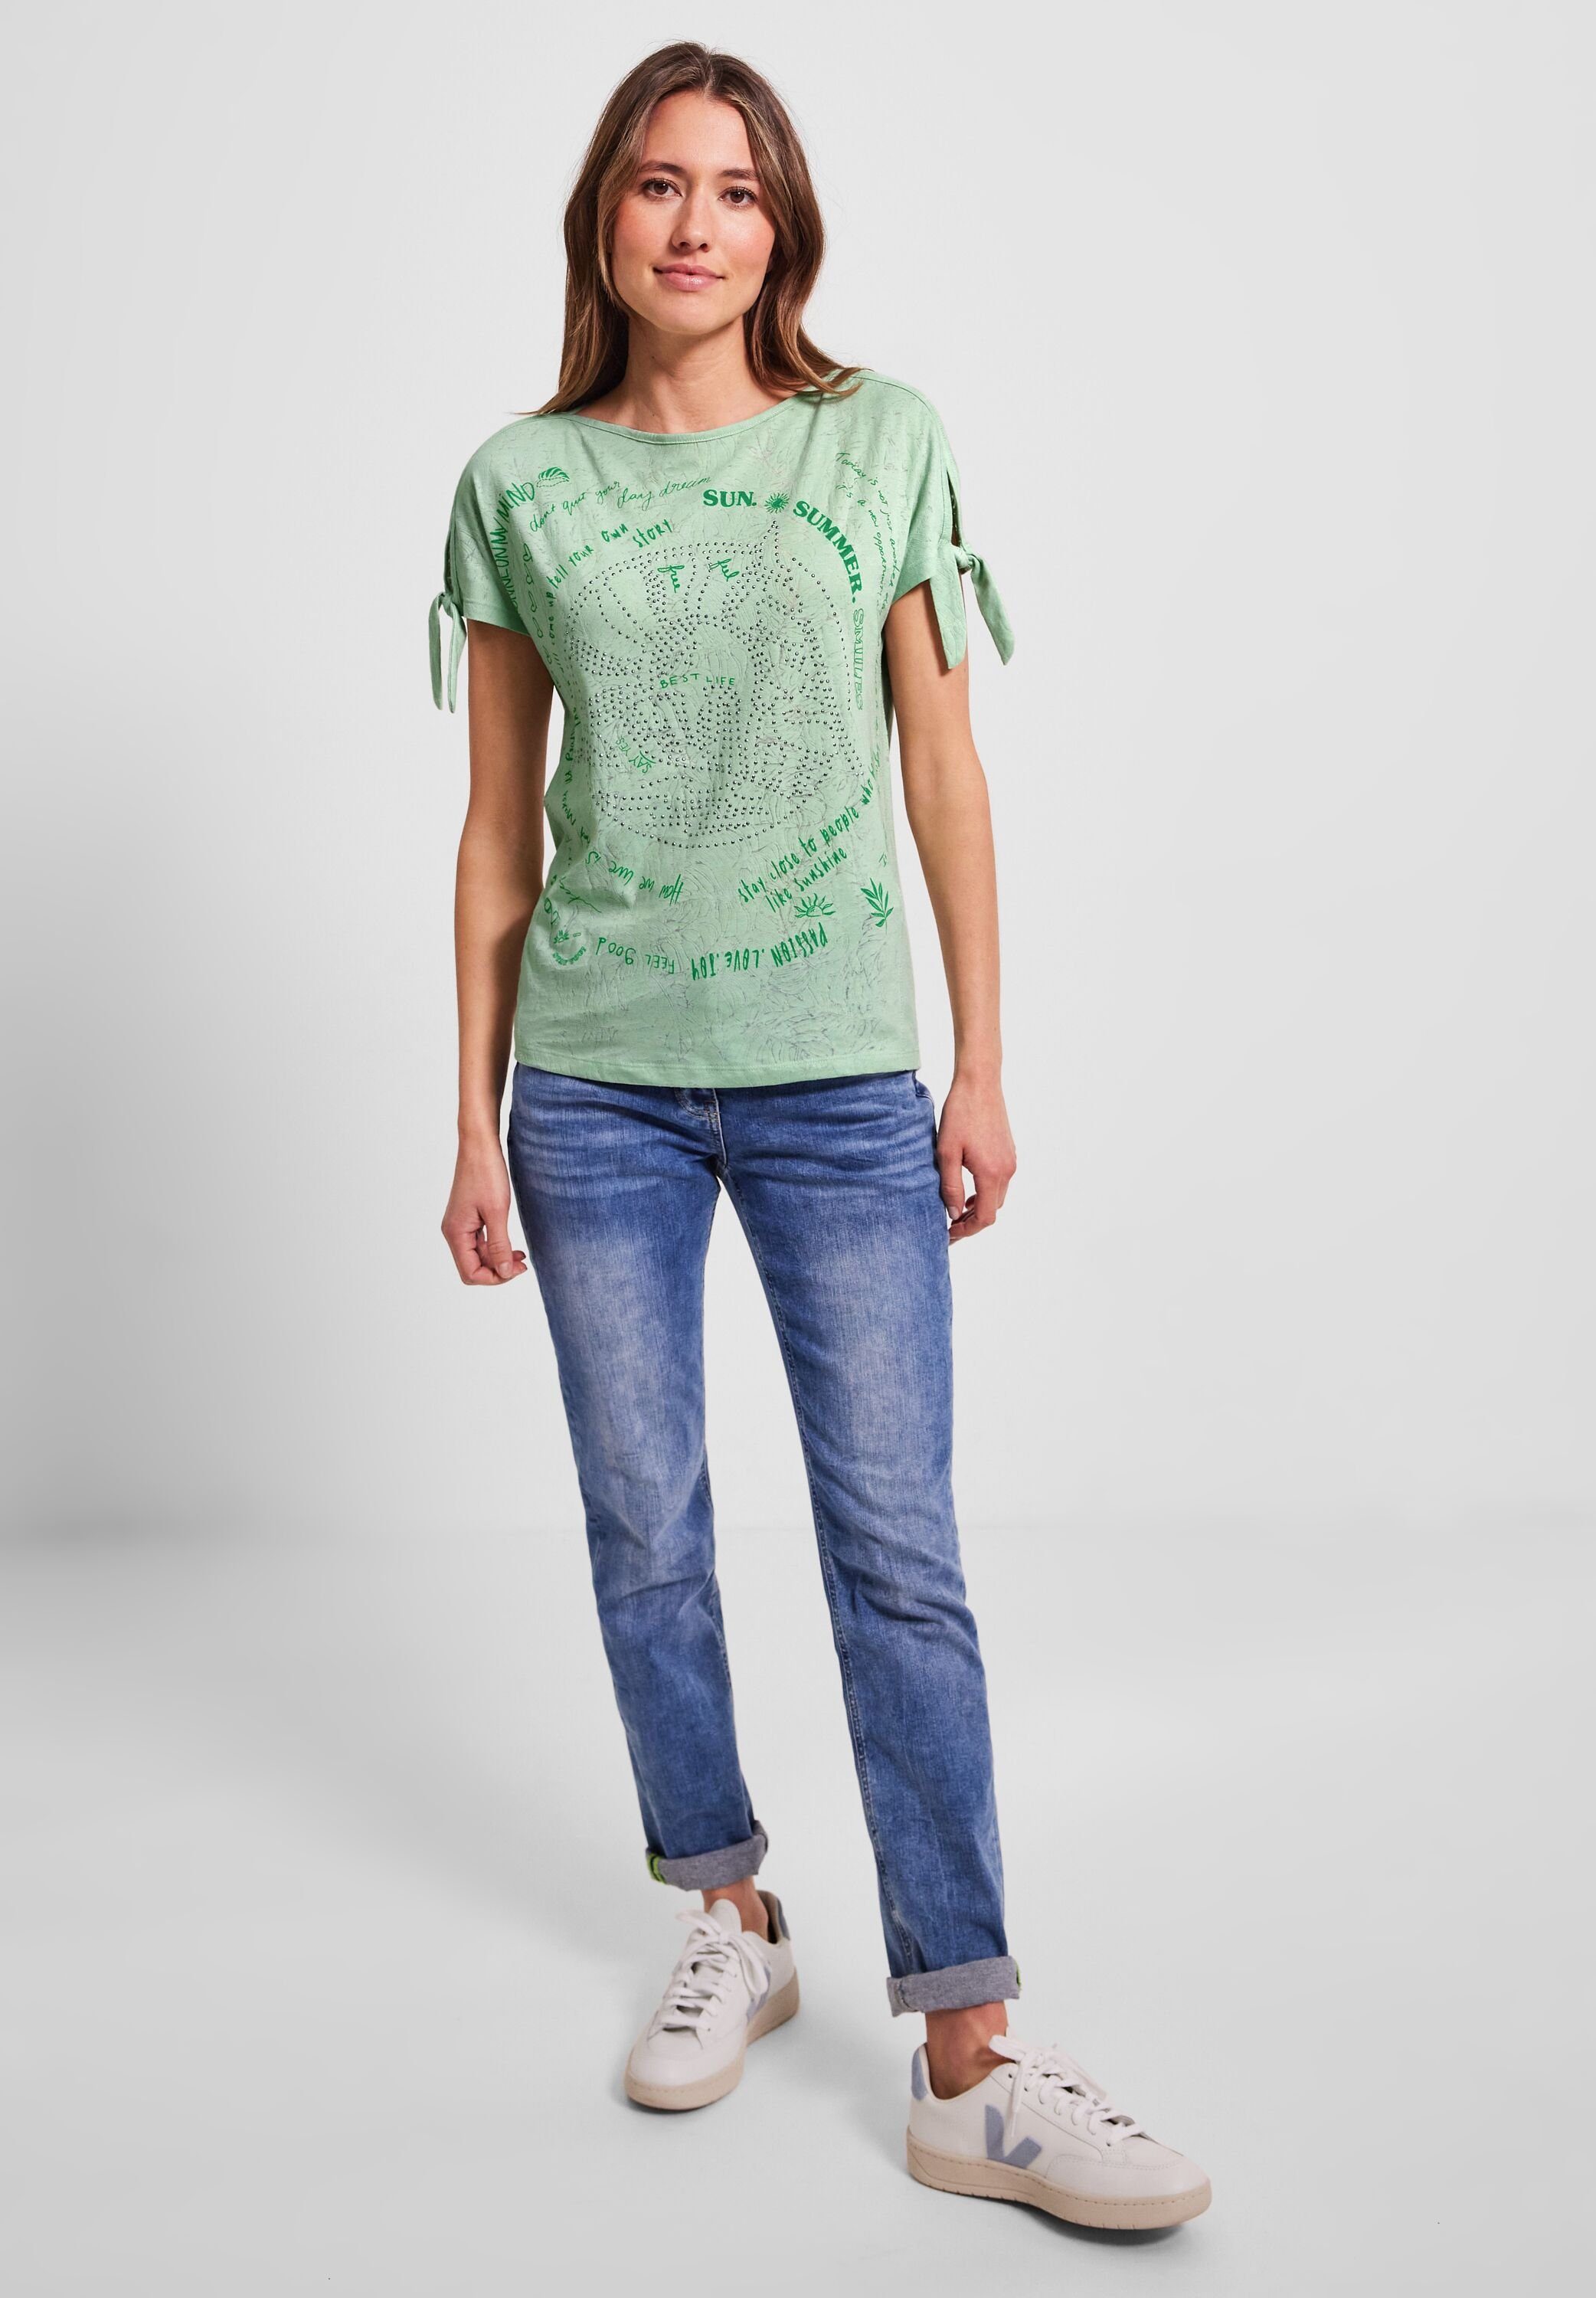 green Salvia burn in Cecil out Knotendetail Out T-Shirt Knotendetail (1-tlg) Cecil mit T-Shirt salvia Burn